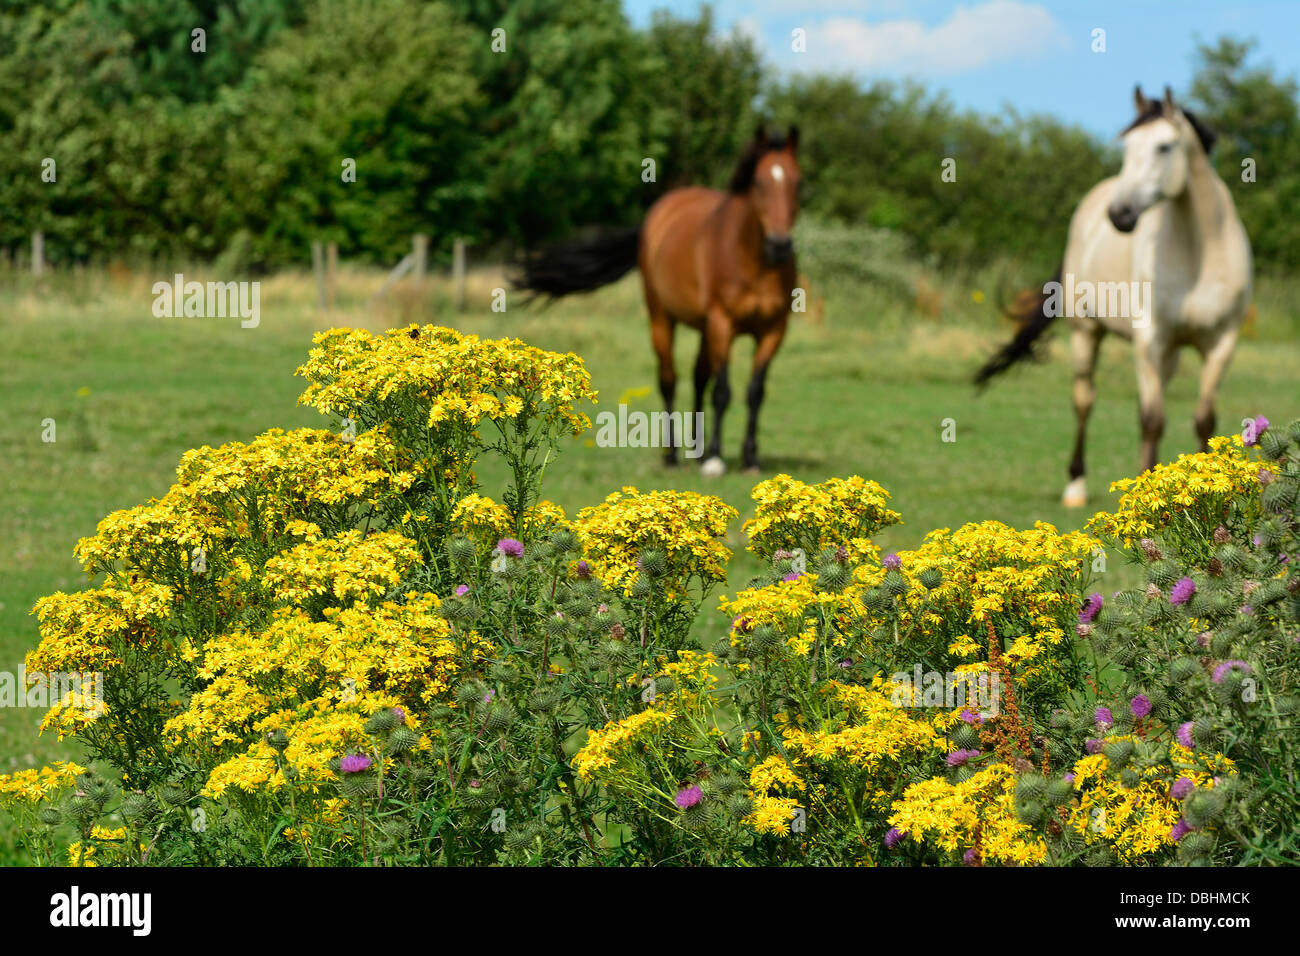 Horses graze in a field with ragwort plants in the foreground near Market Harborough, Leicestershire, 29th July, 2013. Credit:  John Robertson/Alamy Live News Stock Photo